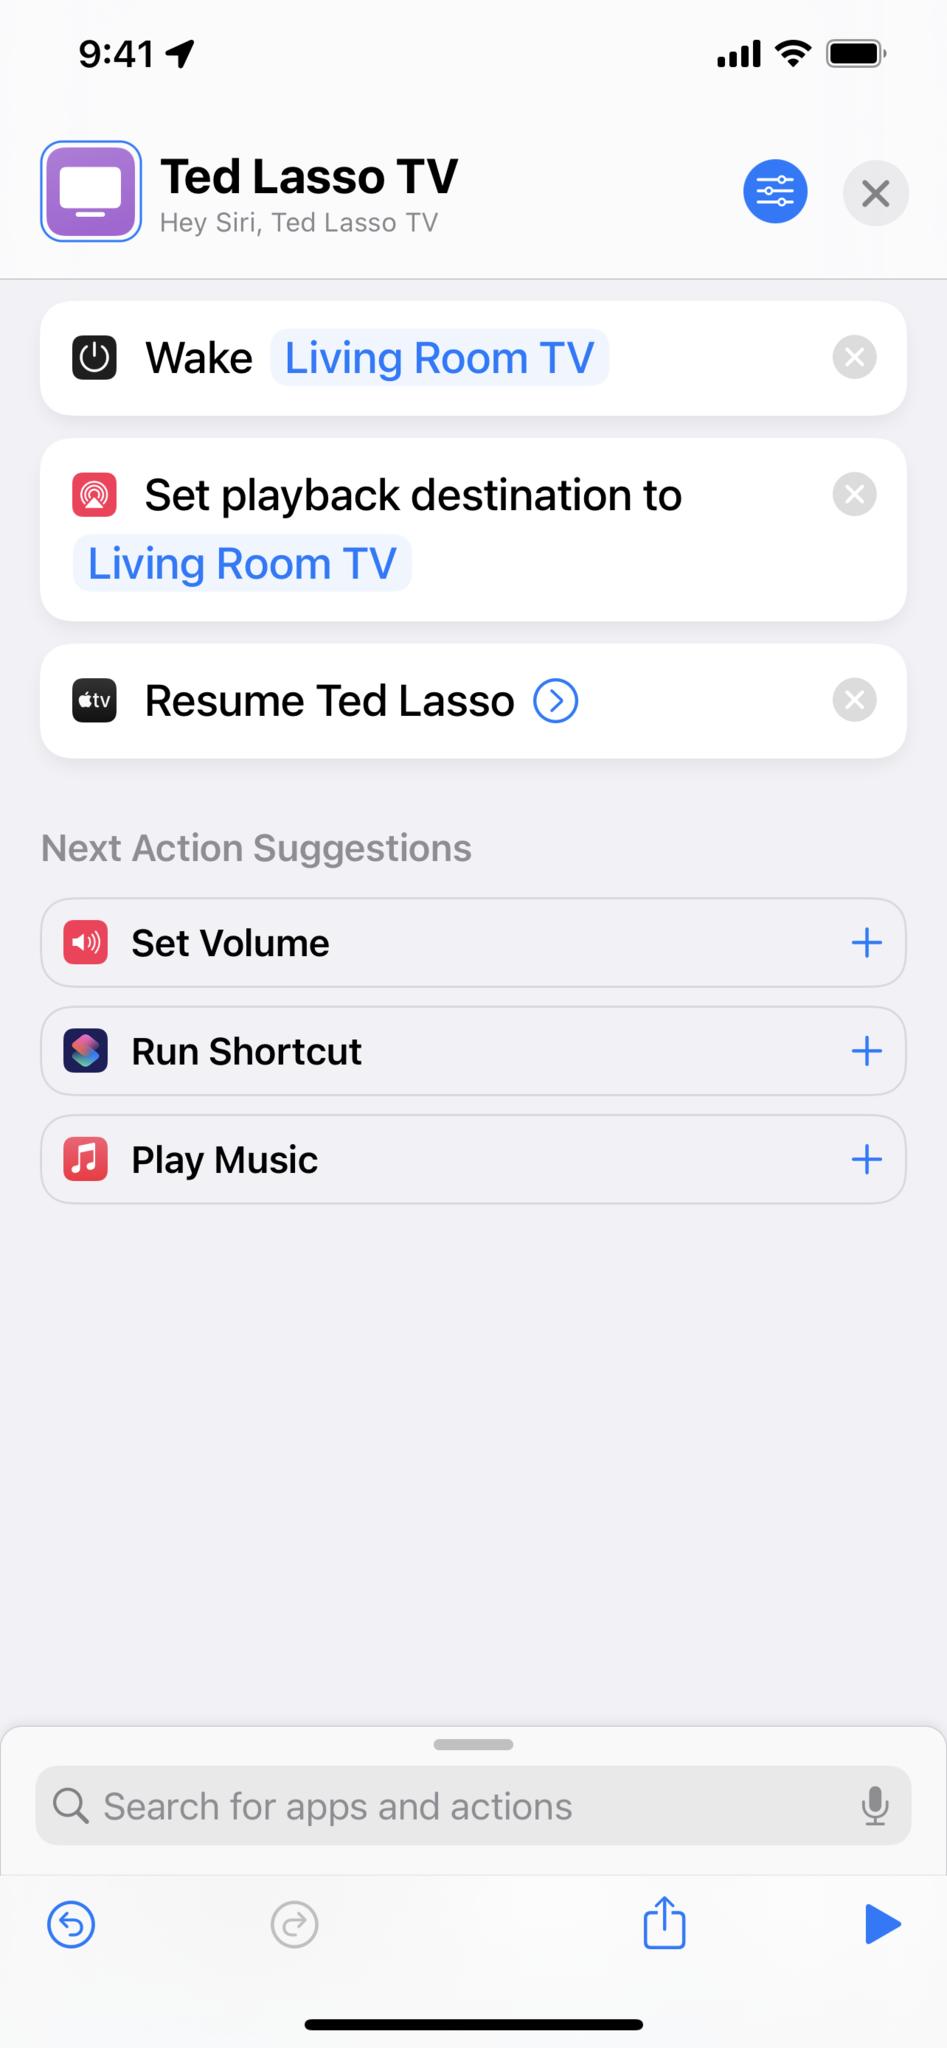 Screenshot of a "Ted Lasso TV" shortcut that wakes an Apple TV, uses Set Playback Destination to send to the same TV, and resumes Ted Lasso.